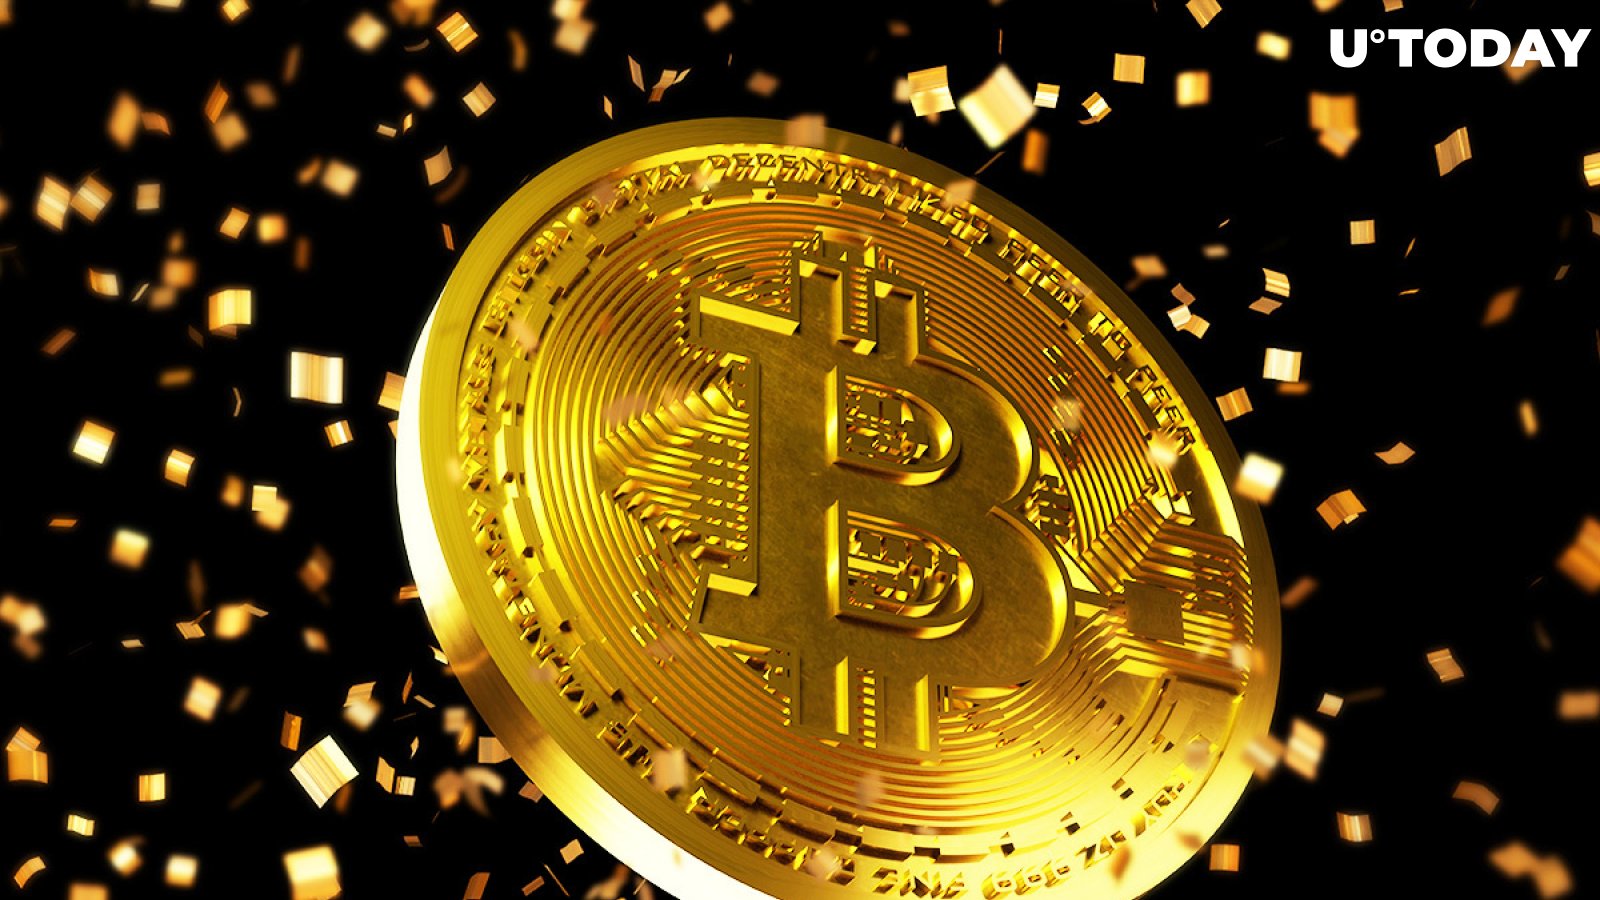 We’re Going to Stick to Bitcoin, Even Though Gold May Soar Too, SkyBridge Capital Co-CIO Says